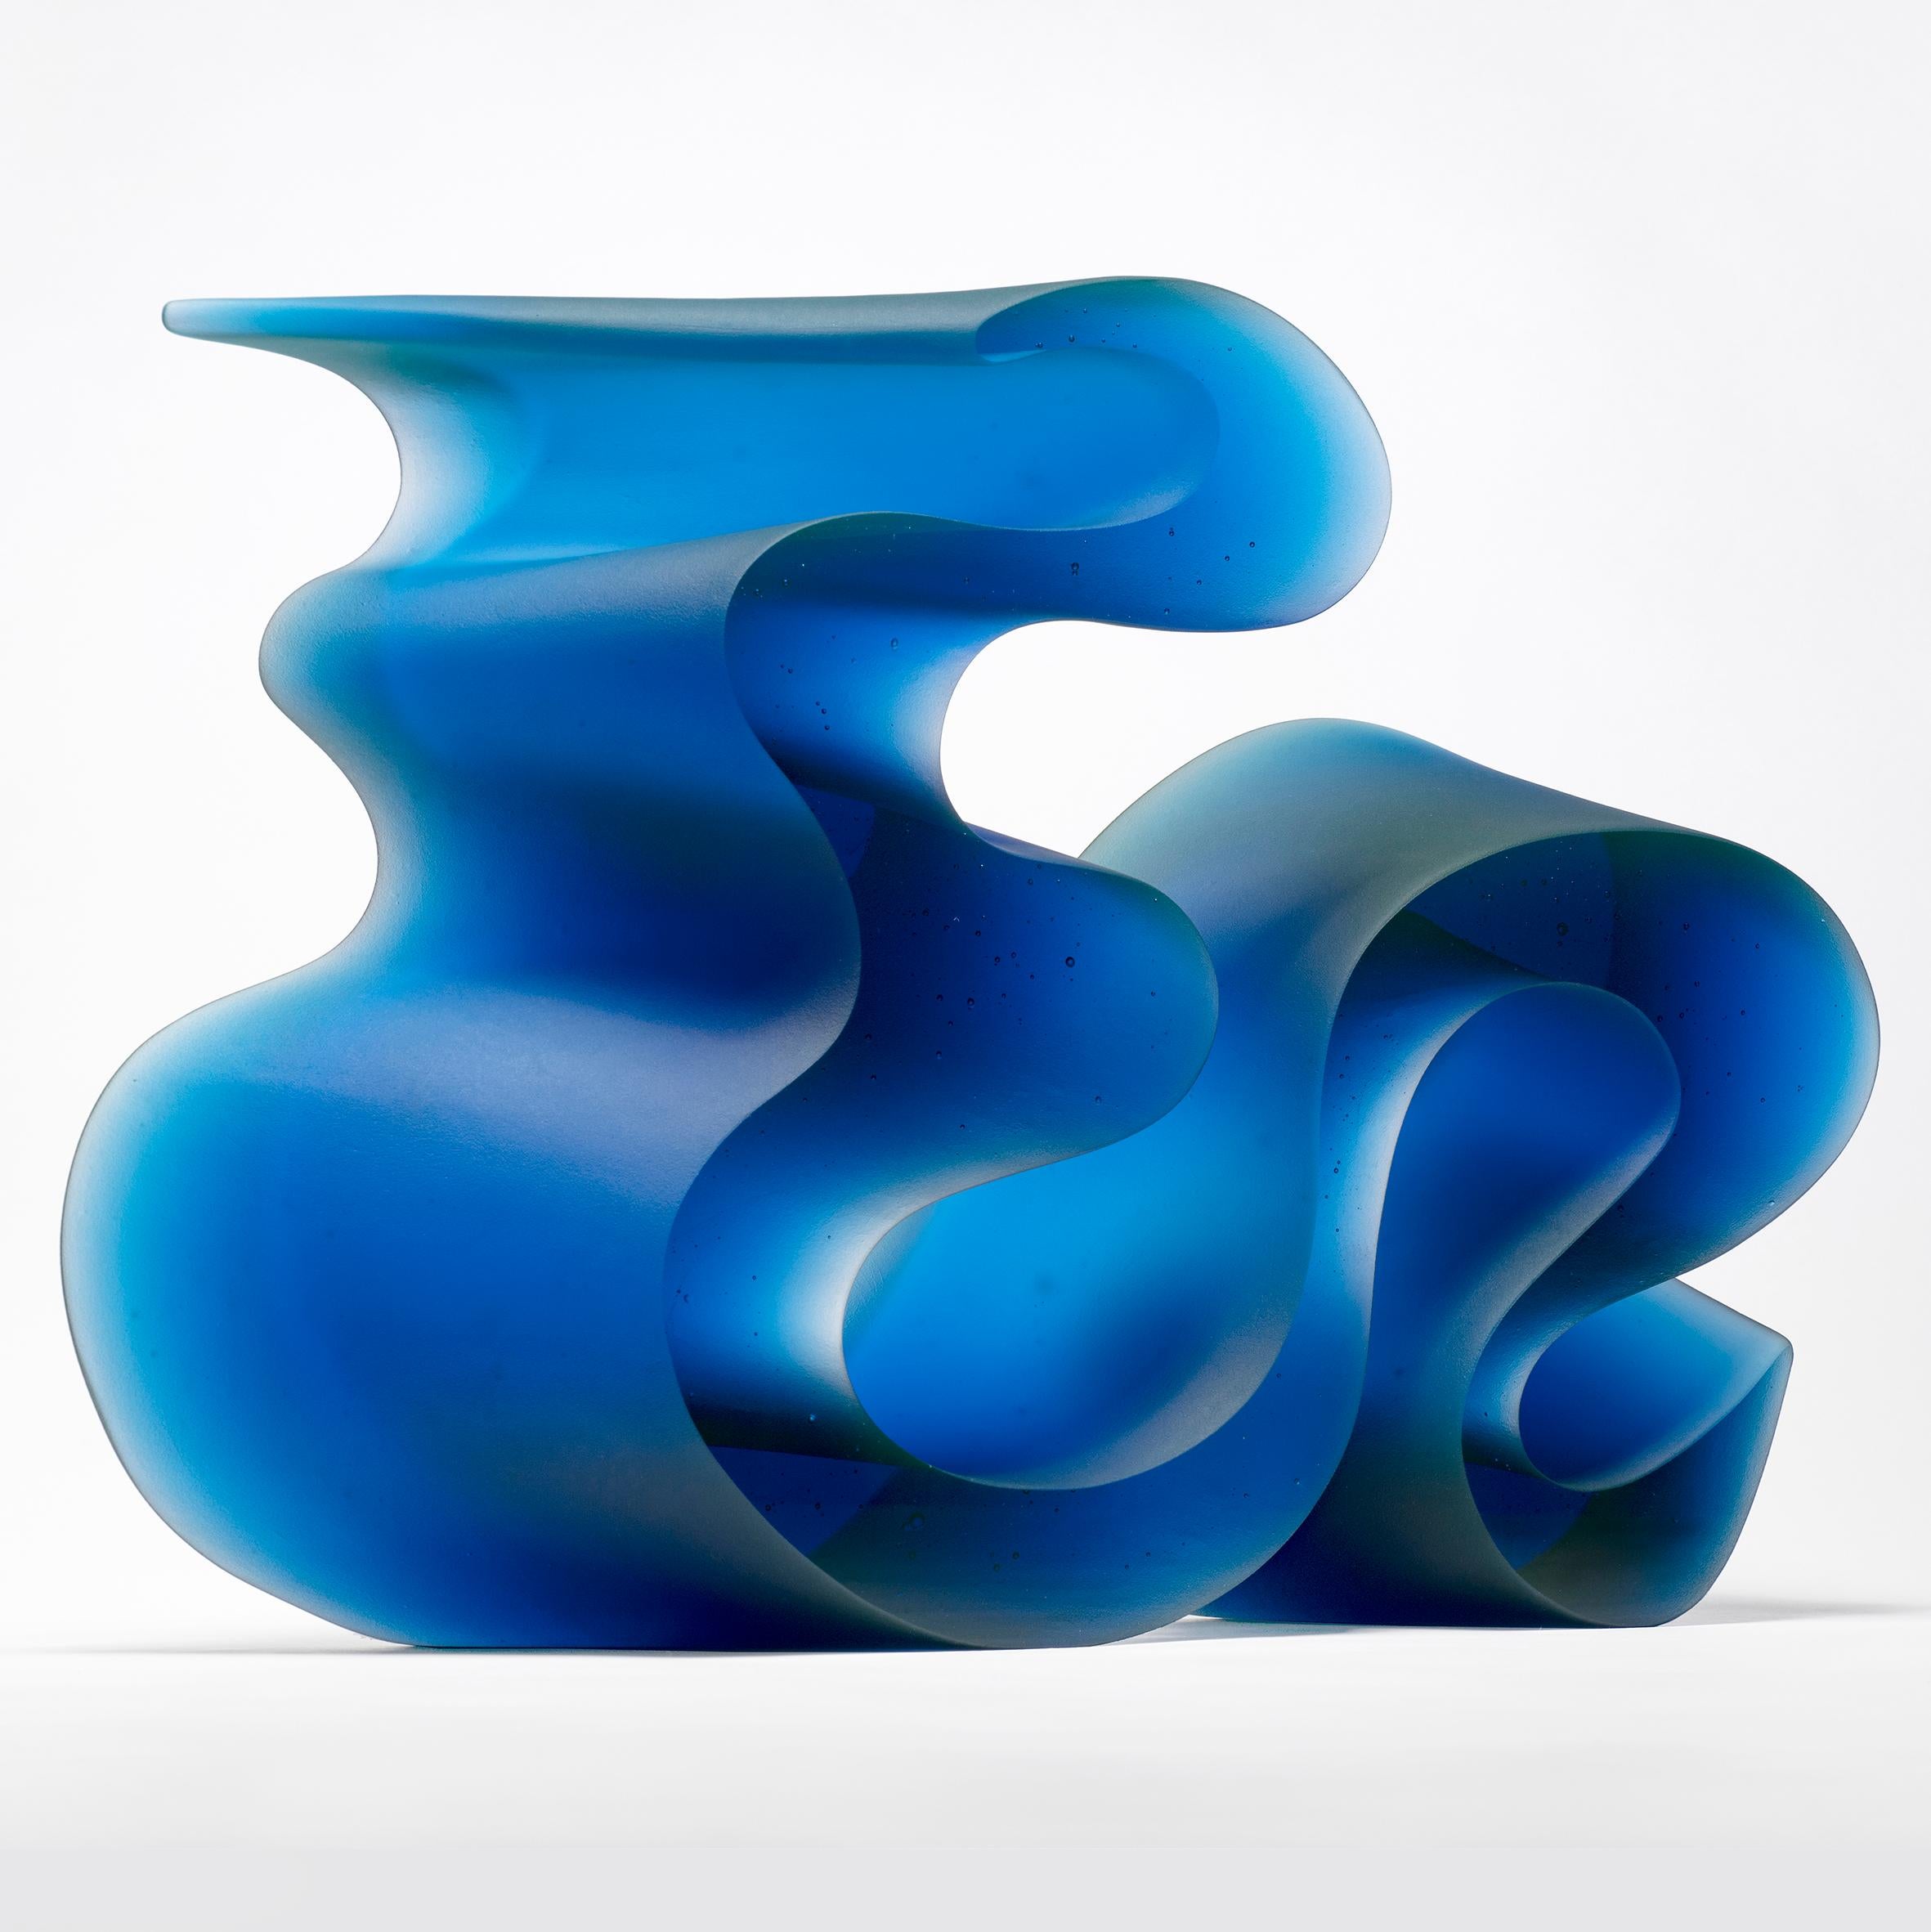 Big blue line is a unique cast glass sculpture in blue glass, created by the Danish artist Karin Mørch. Dramatic sweeping curves Meander and follow the beautiful lines of this heavy and solid cast piece. Mørch intimately understands her glass and